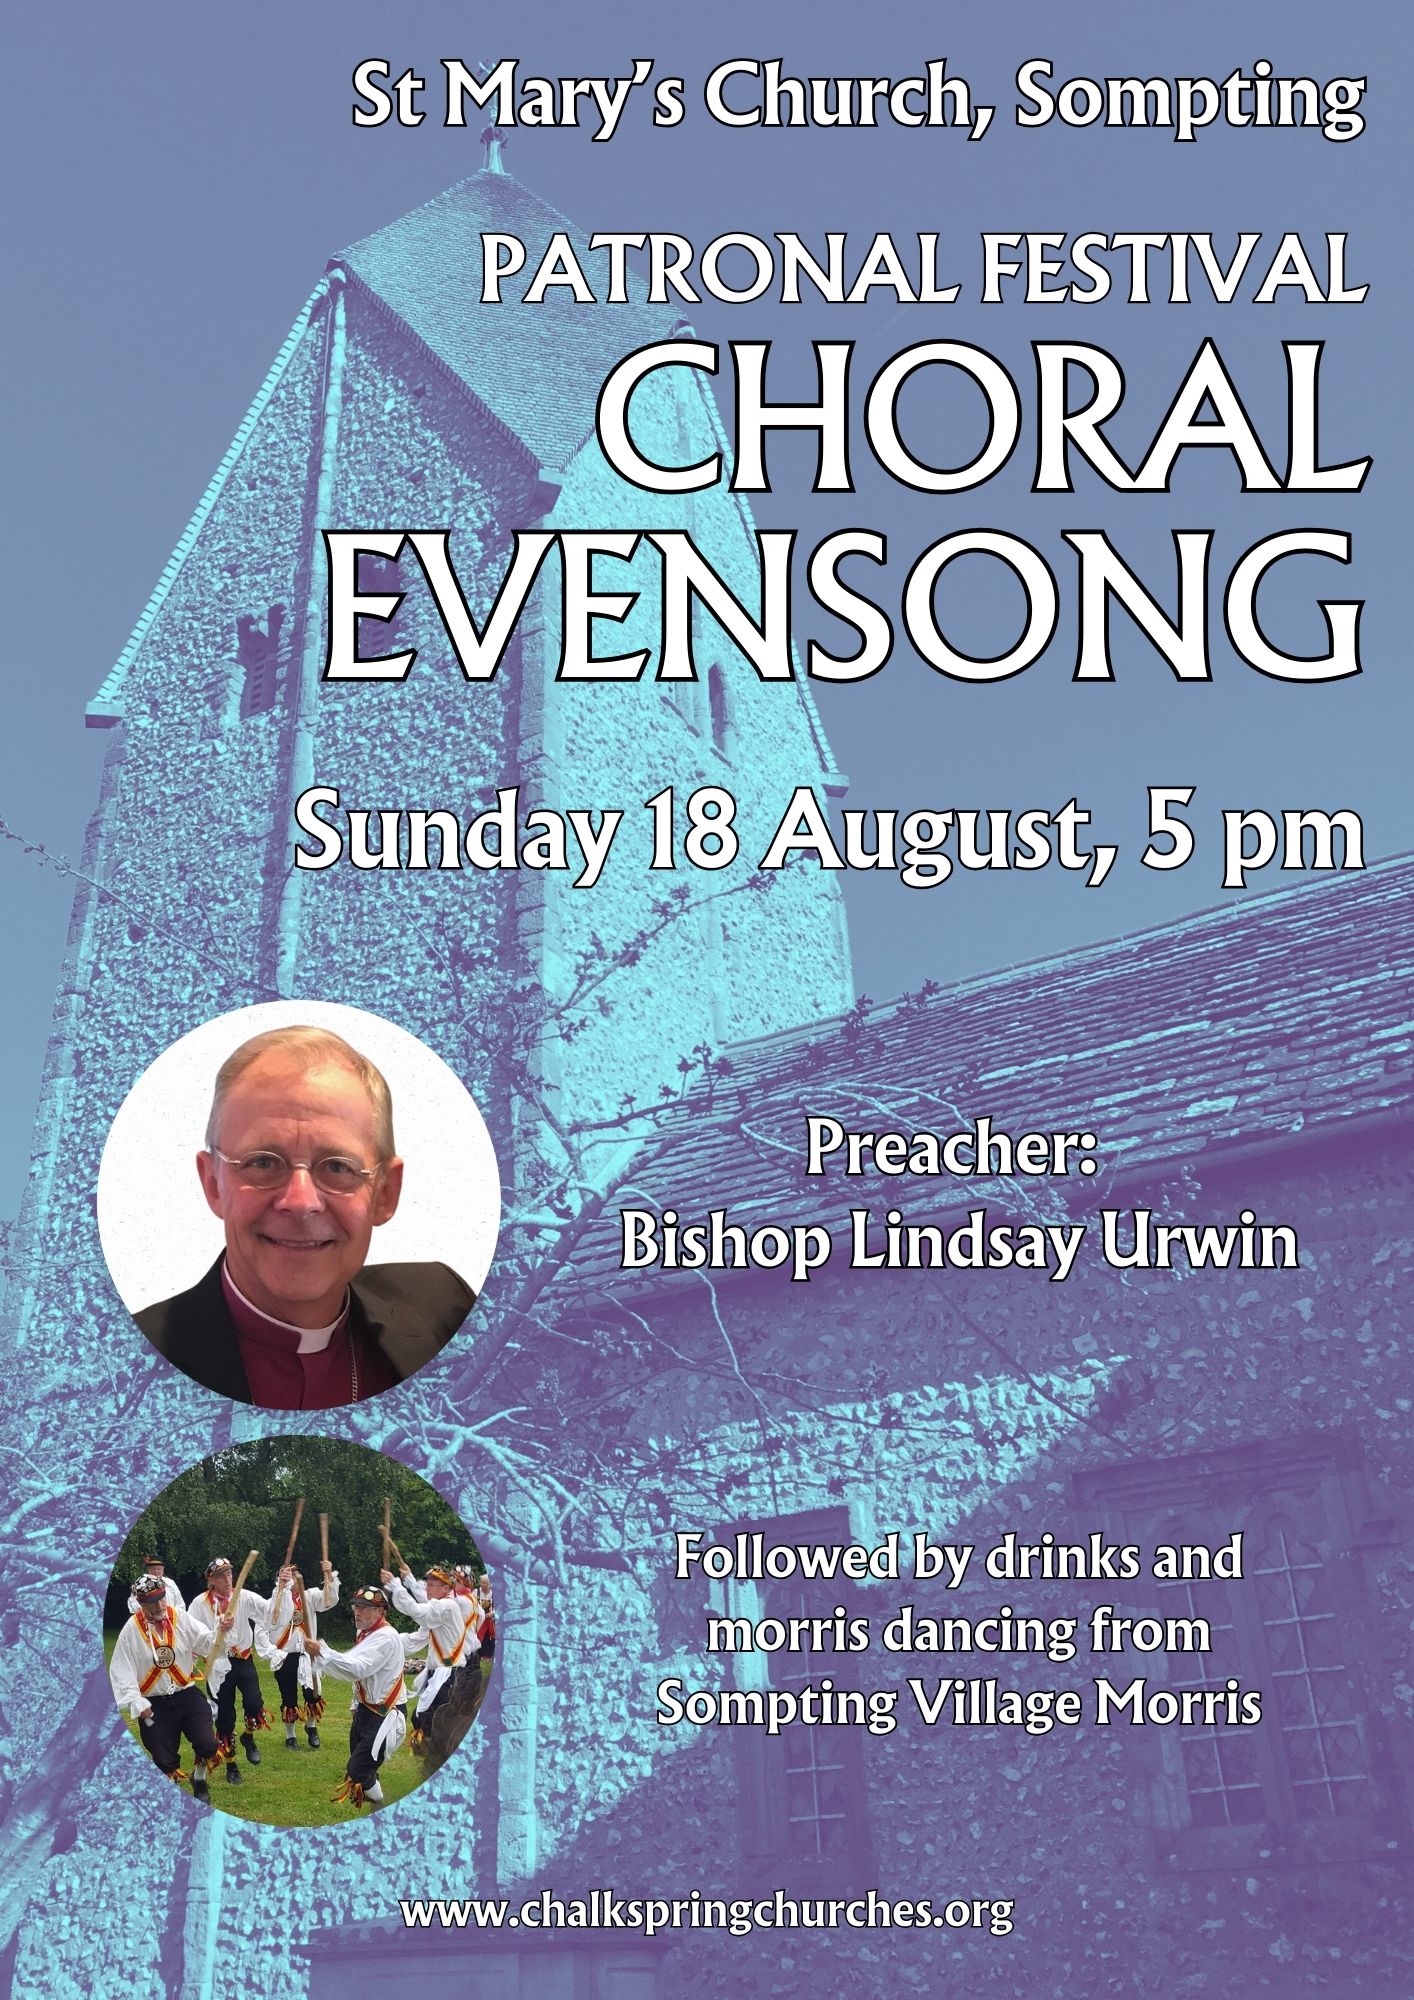 Patronal Festival Choral Evensong. Sunday 18 August, 5pm.